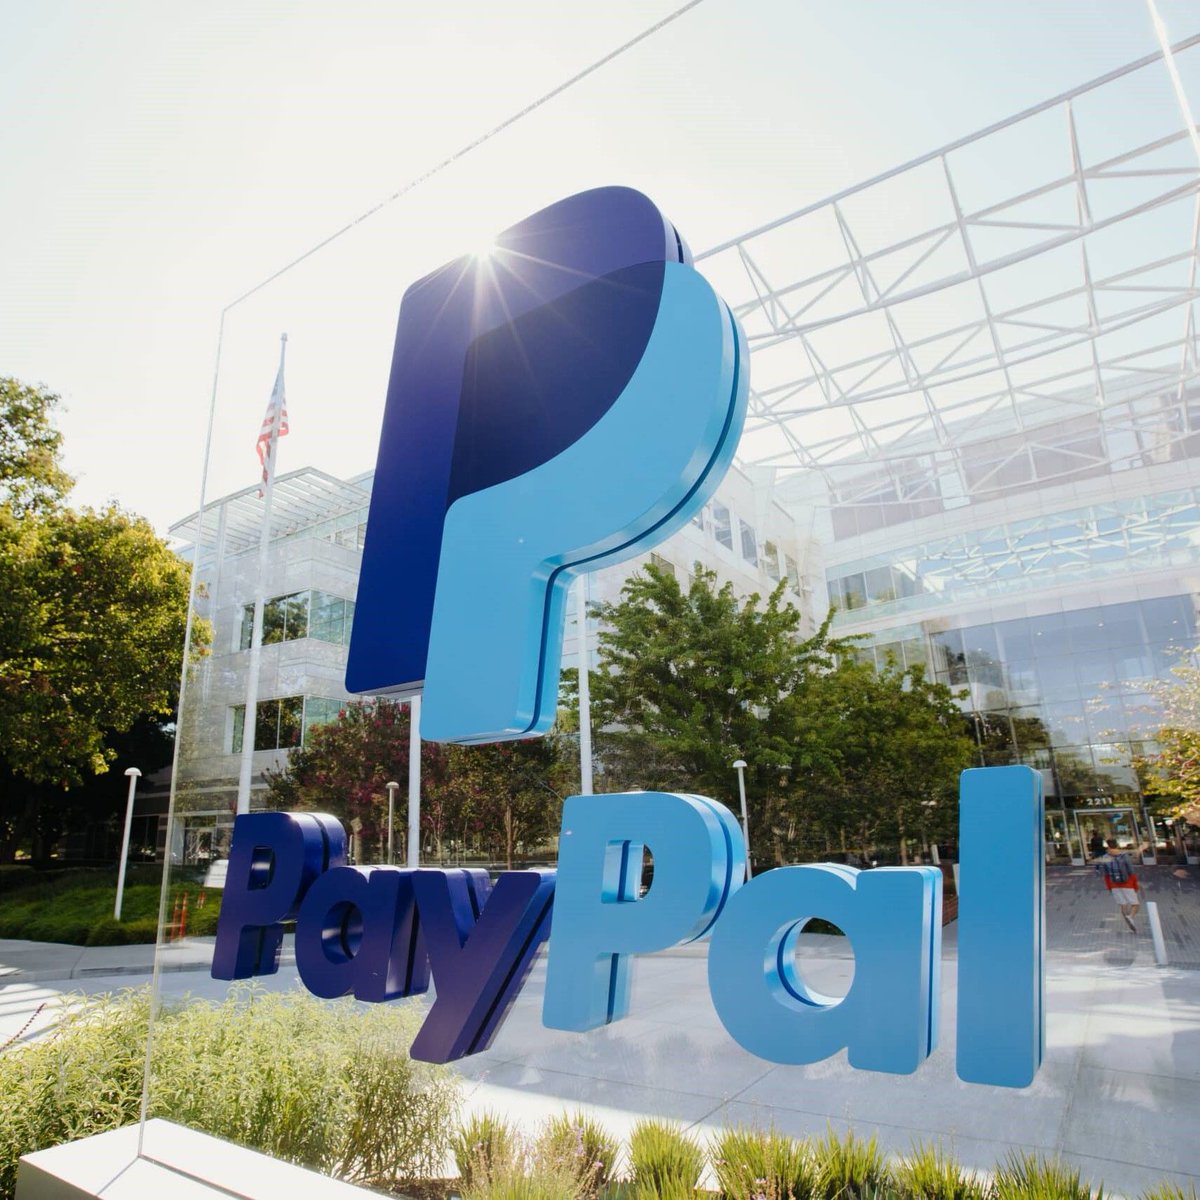 Pricing Rules Are at the Heart of a New Class-Action Lawsuit Against PayPal - Digital Transactions buff.ly/3PJBiD4 #payments #pricing #lawsuit #PayPal #digitalwallets #antisteering #ecommerce #mcommerce #merchants #consumers #onlineshopping @ClassActionLaw